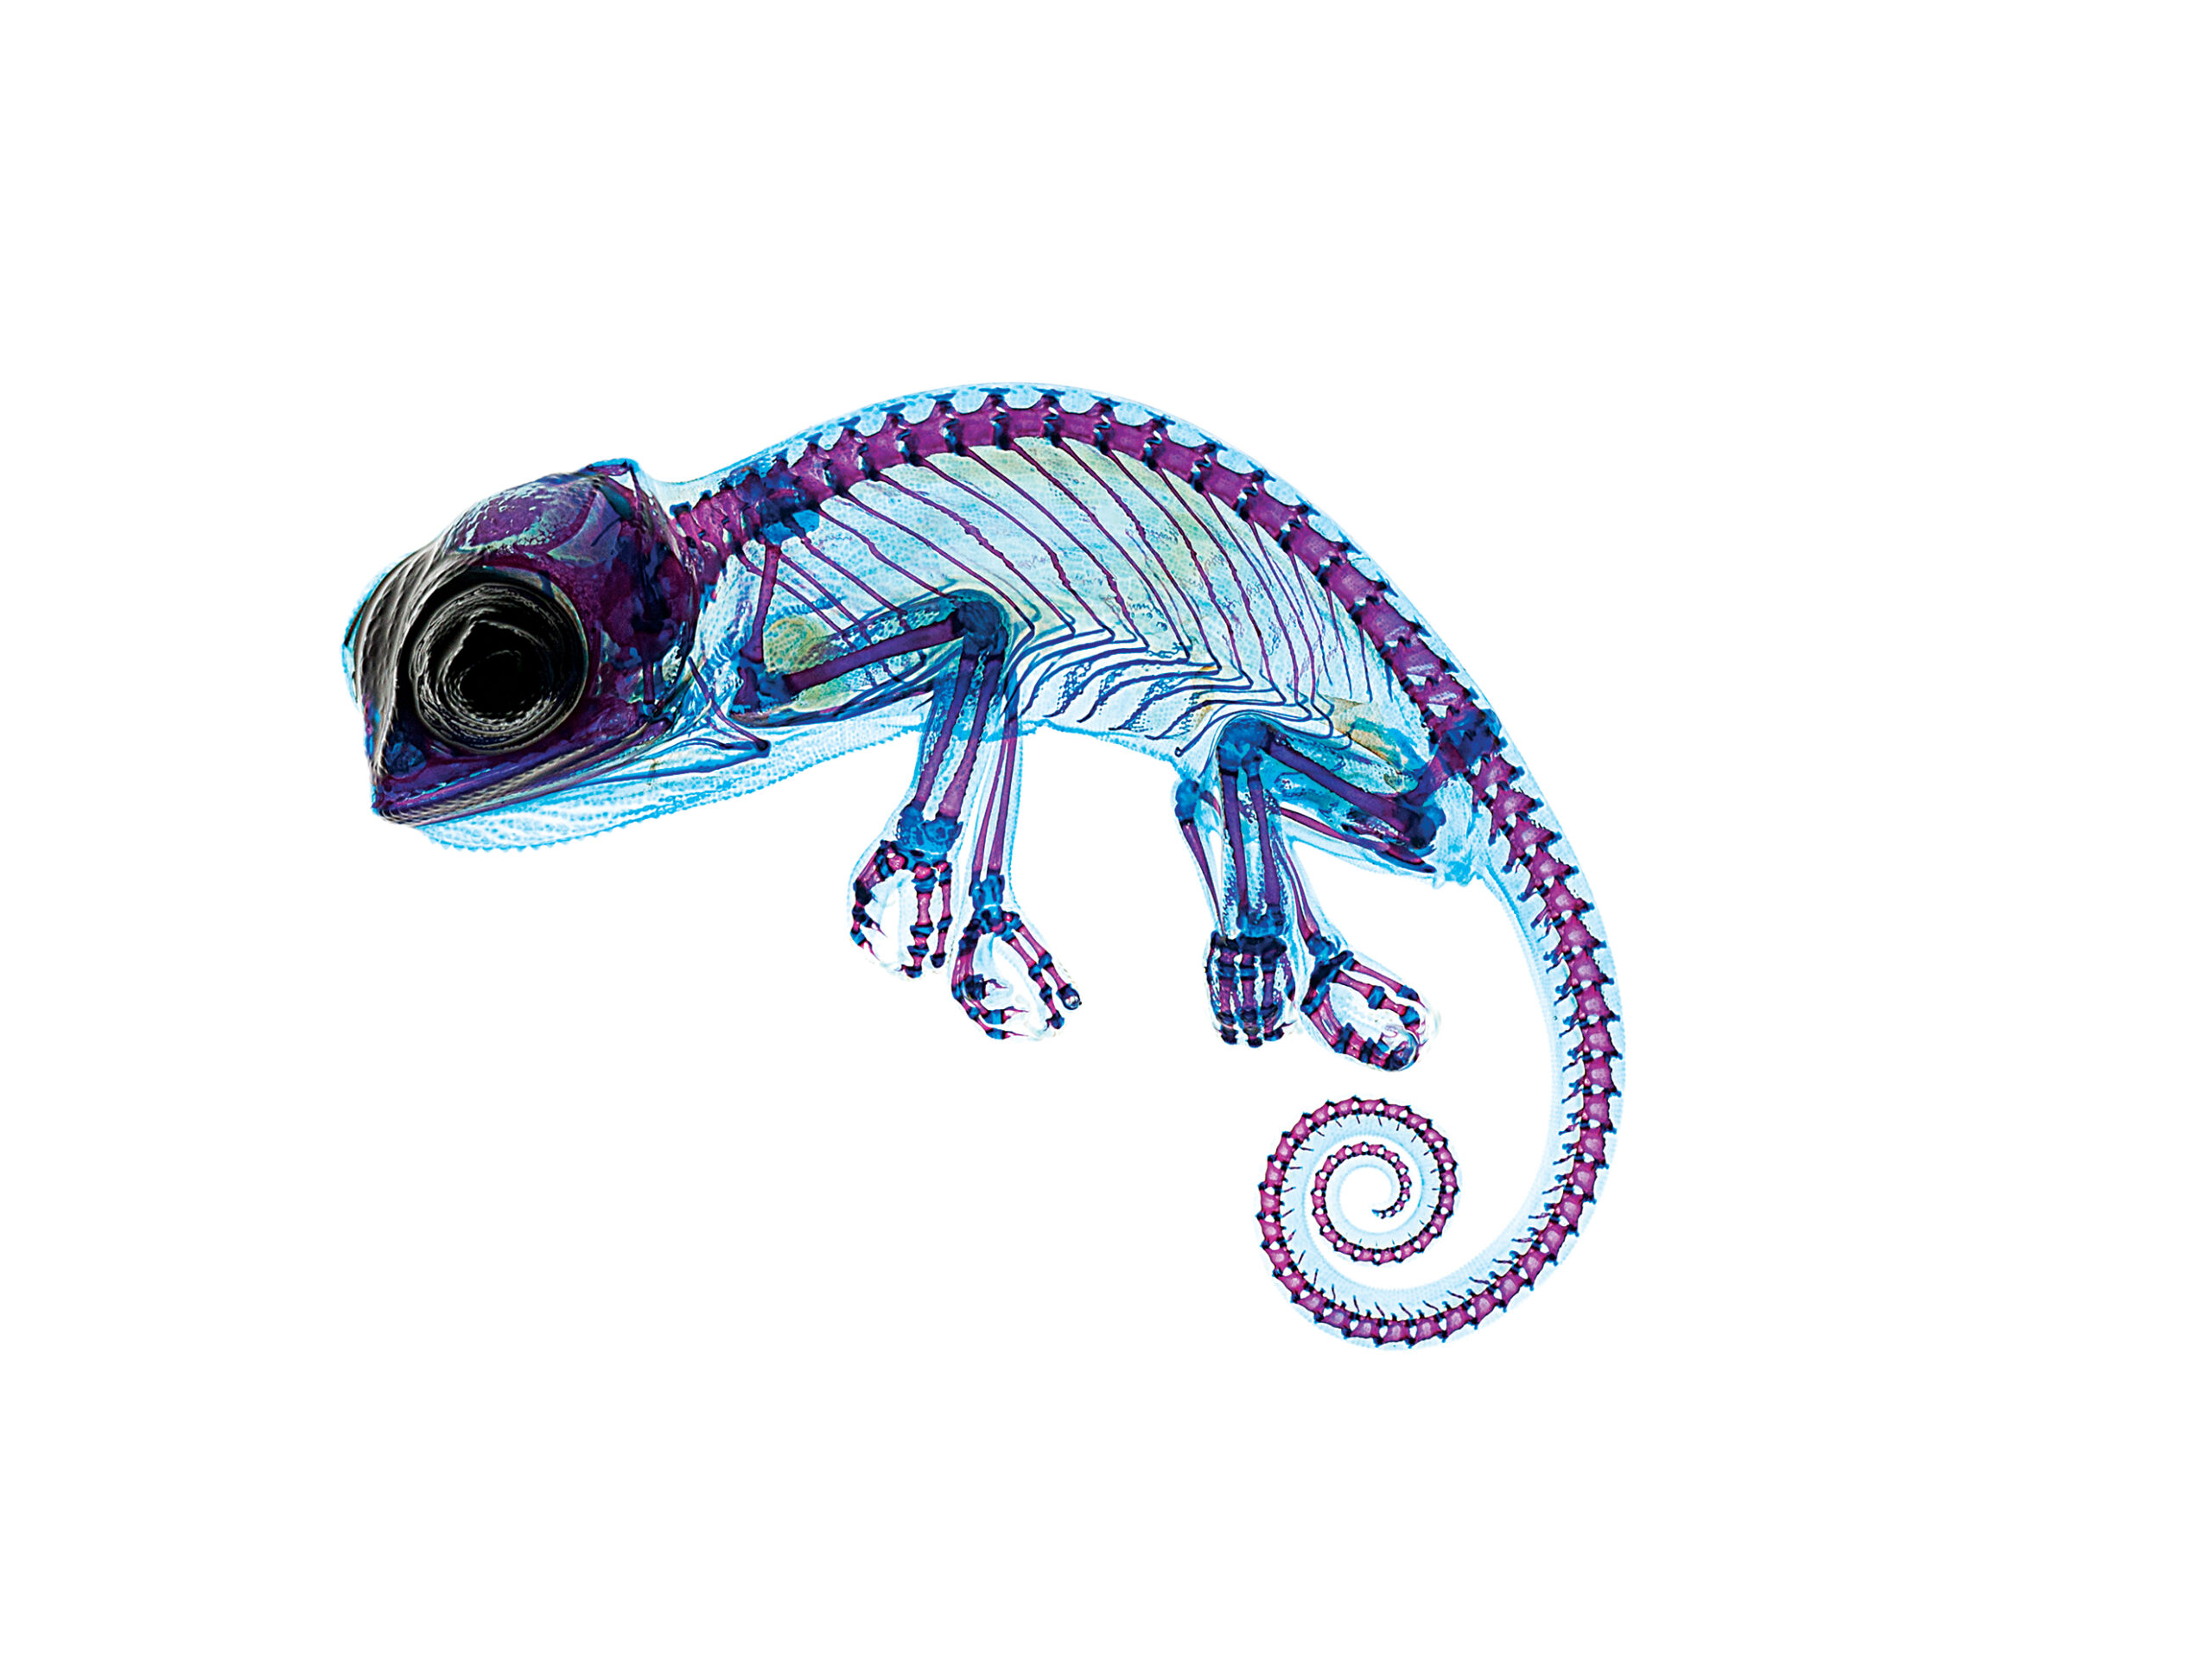 A Delicate Chameleon Displays Vivid Colors Under The Microscope